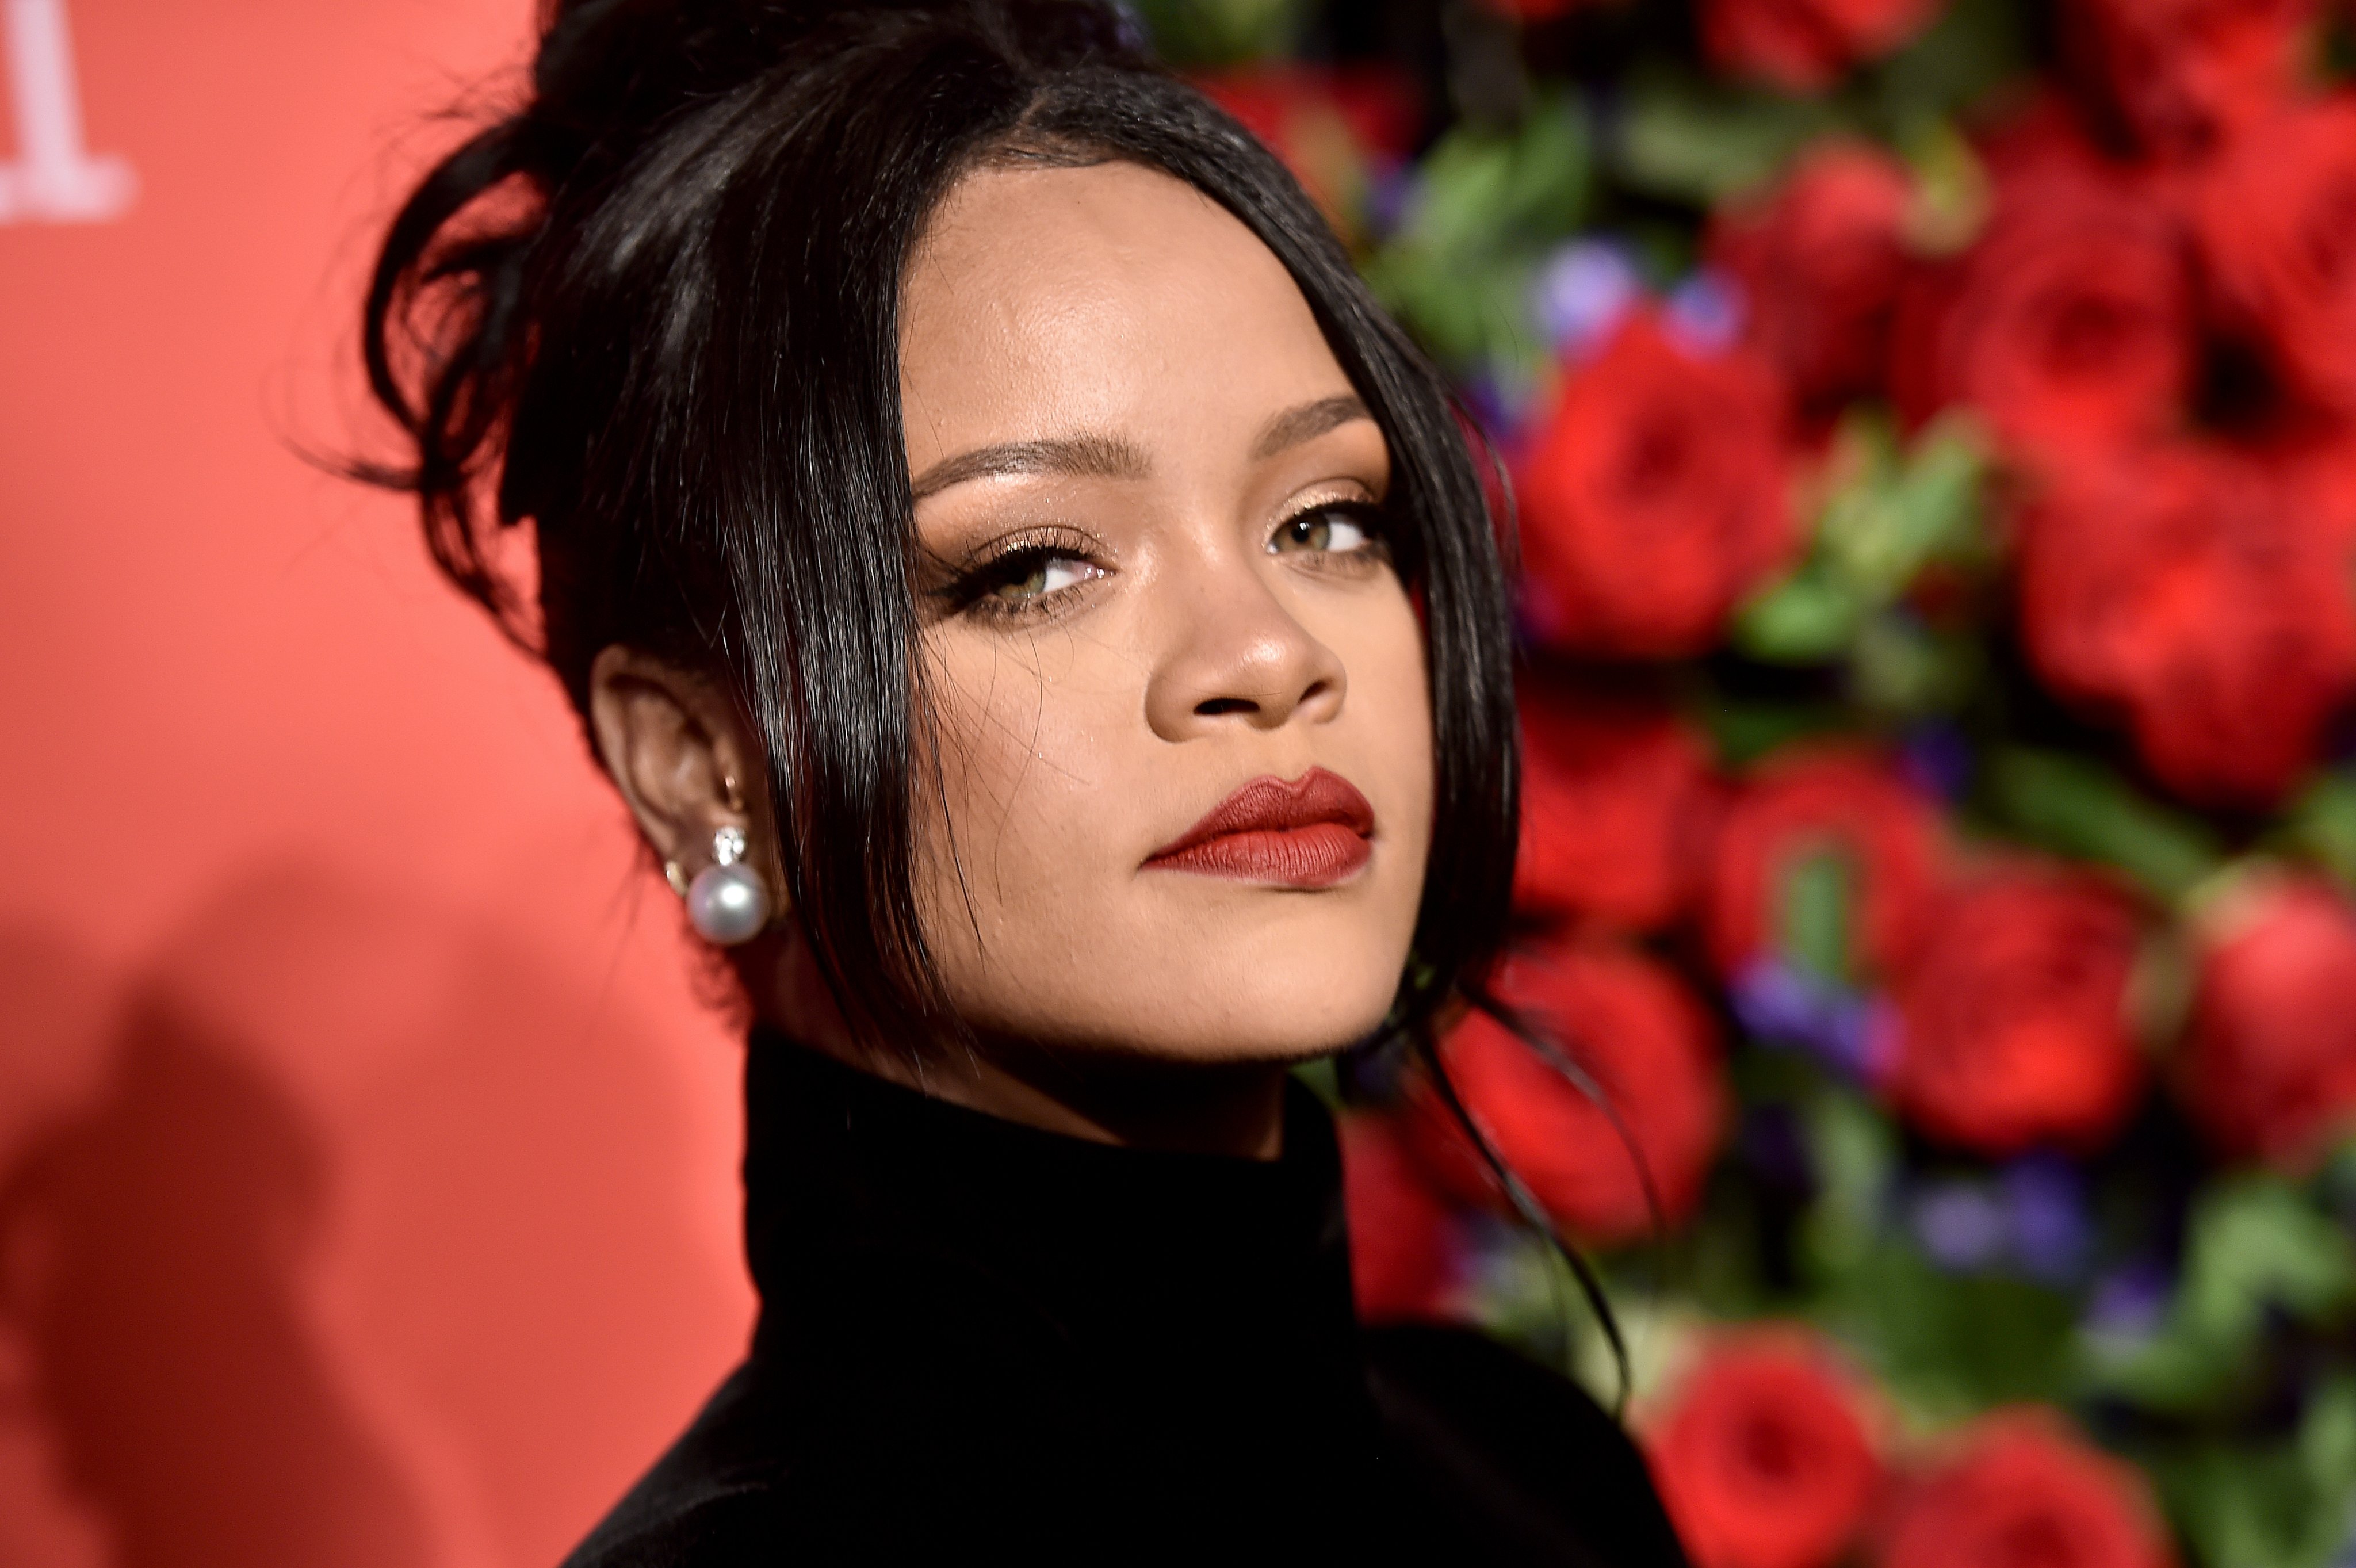 Rihanna Shares Statement on Israel-Palestine Conflict: 'This Cycle